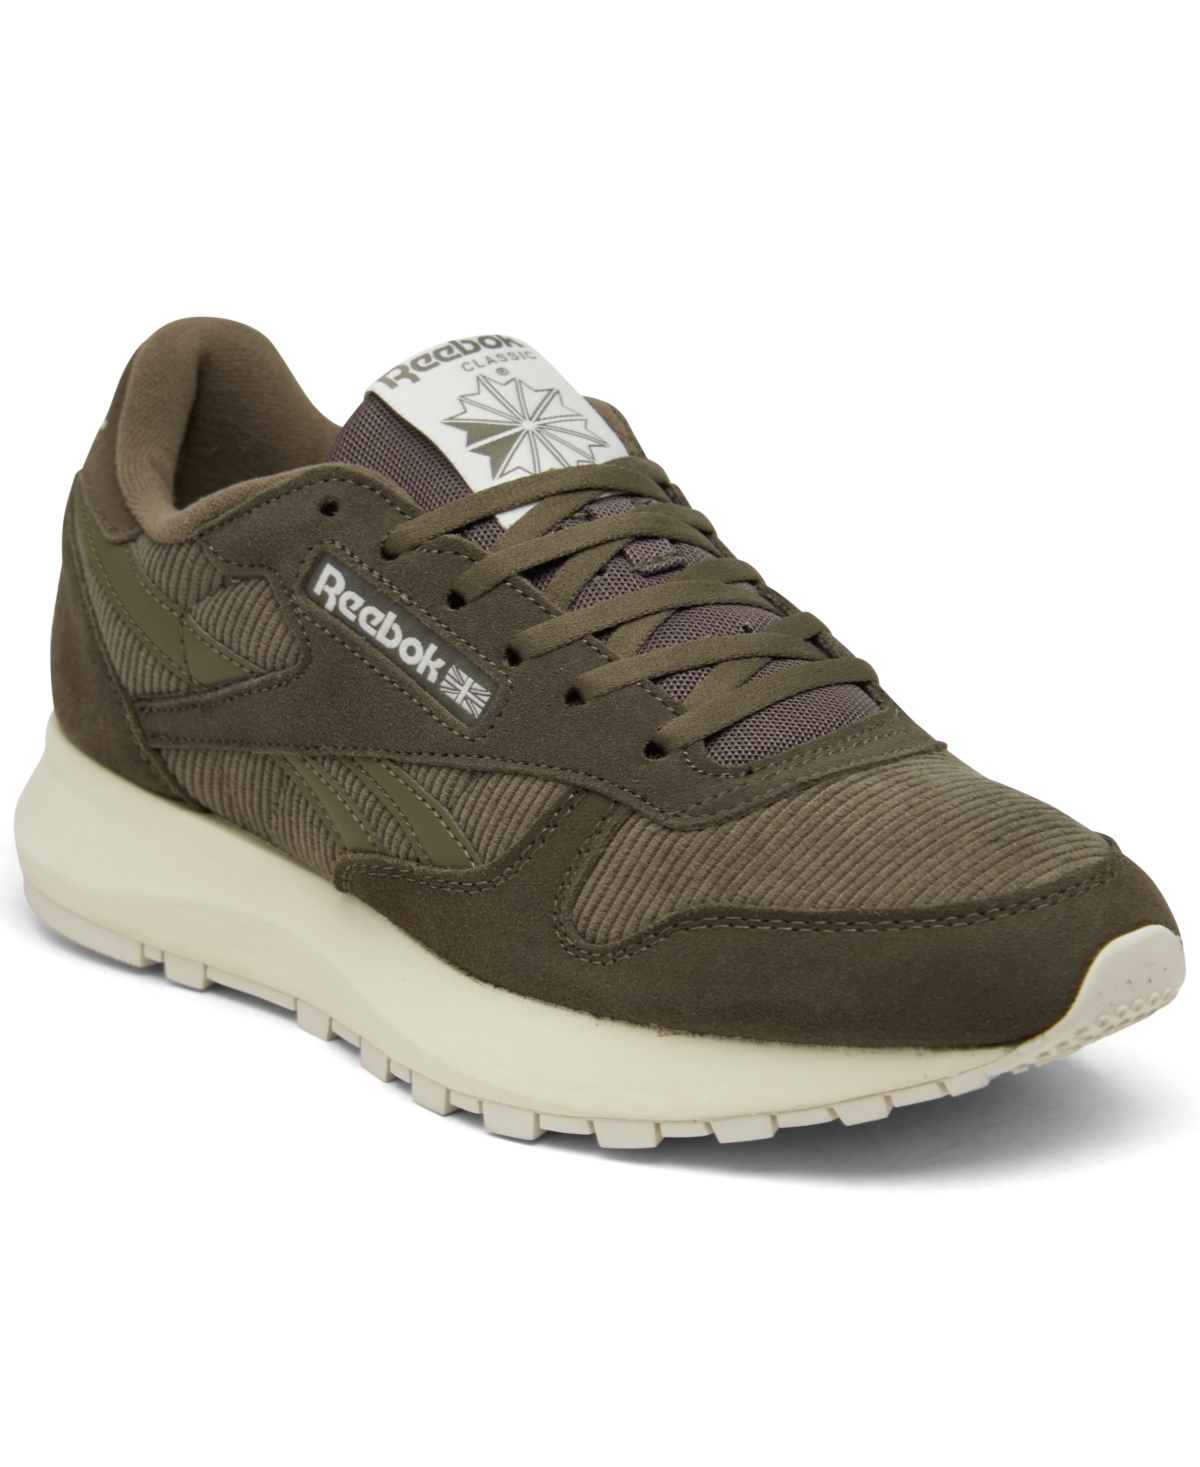 Reebok Women's Classic Sp Casual Sneakers from Finish Line